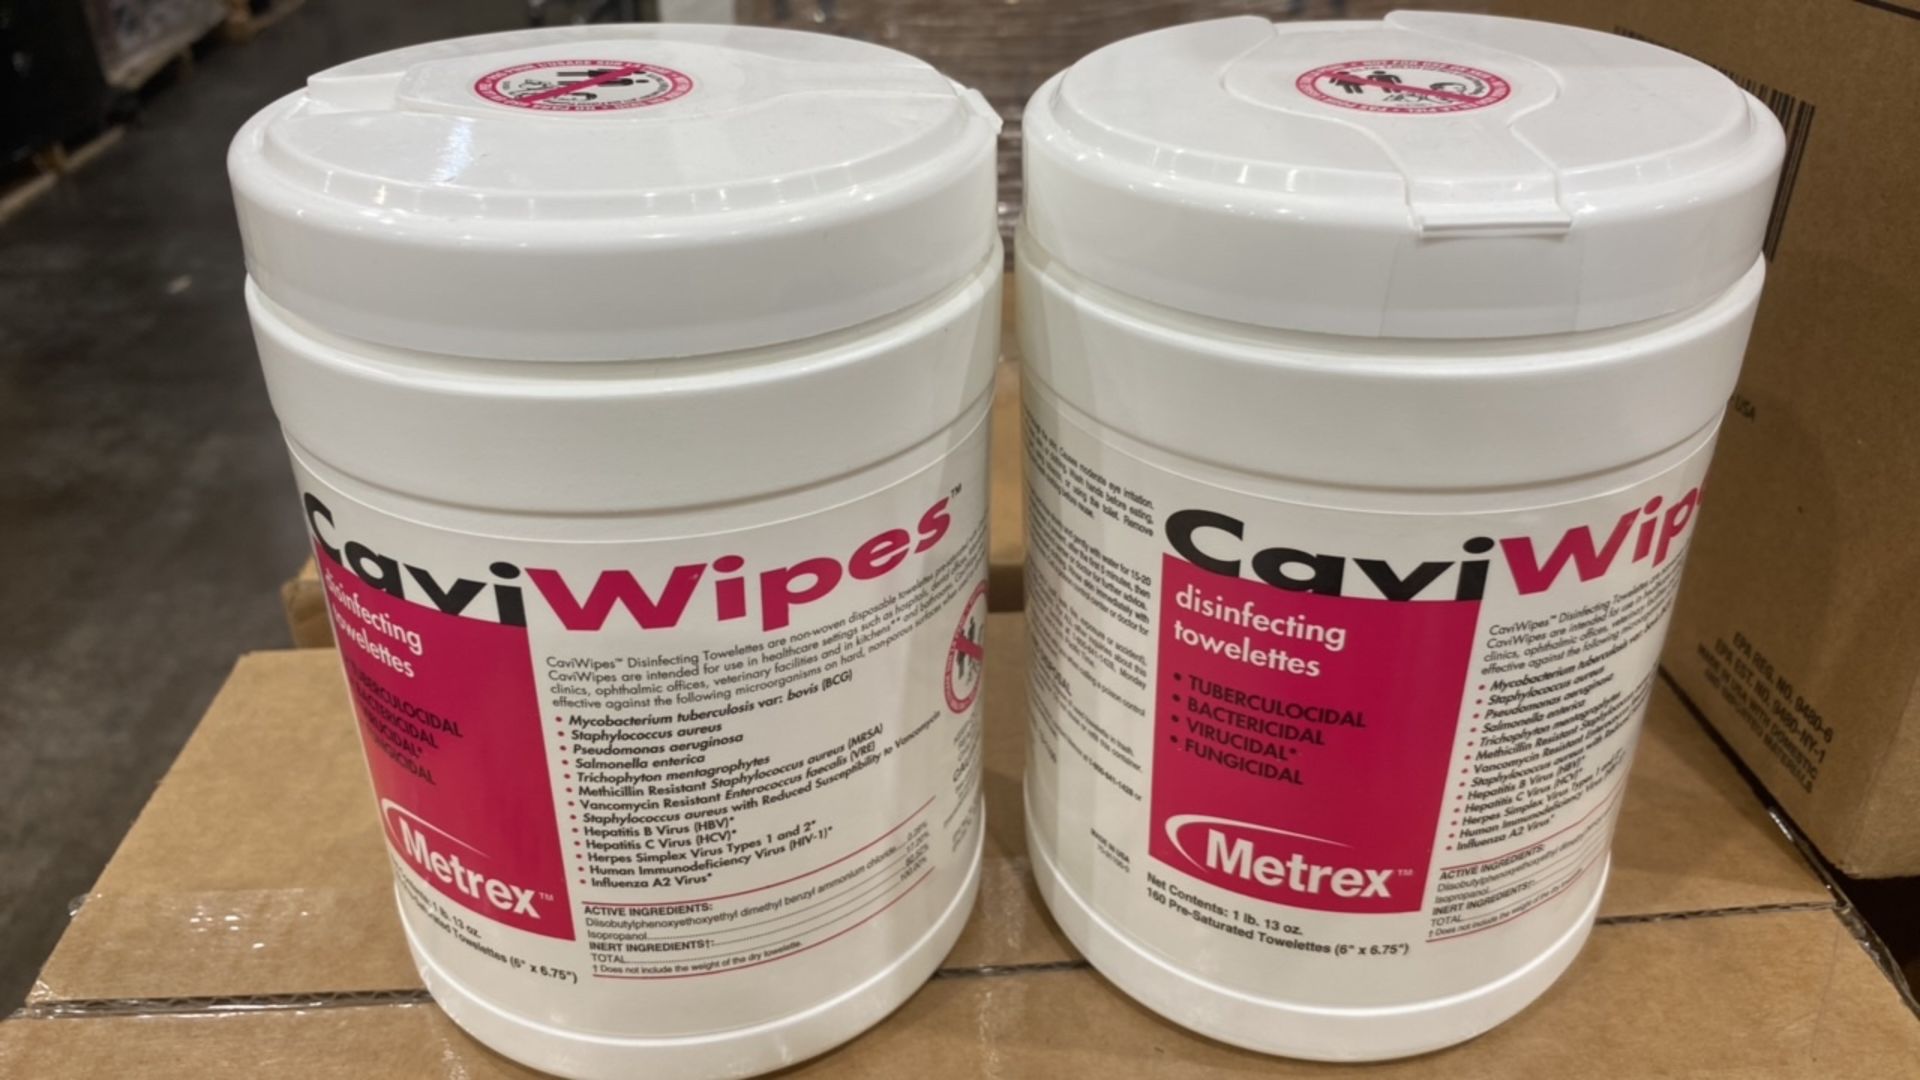 METREX CAVI WIPES 13-1100 DISINFECTING TOWELETTES (EXPIRED) QTY:30 (+11, STACKED ON LOT 138) - Image 3 of 3